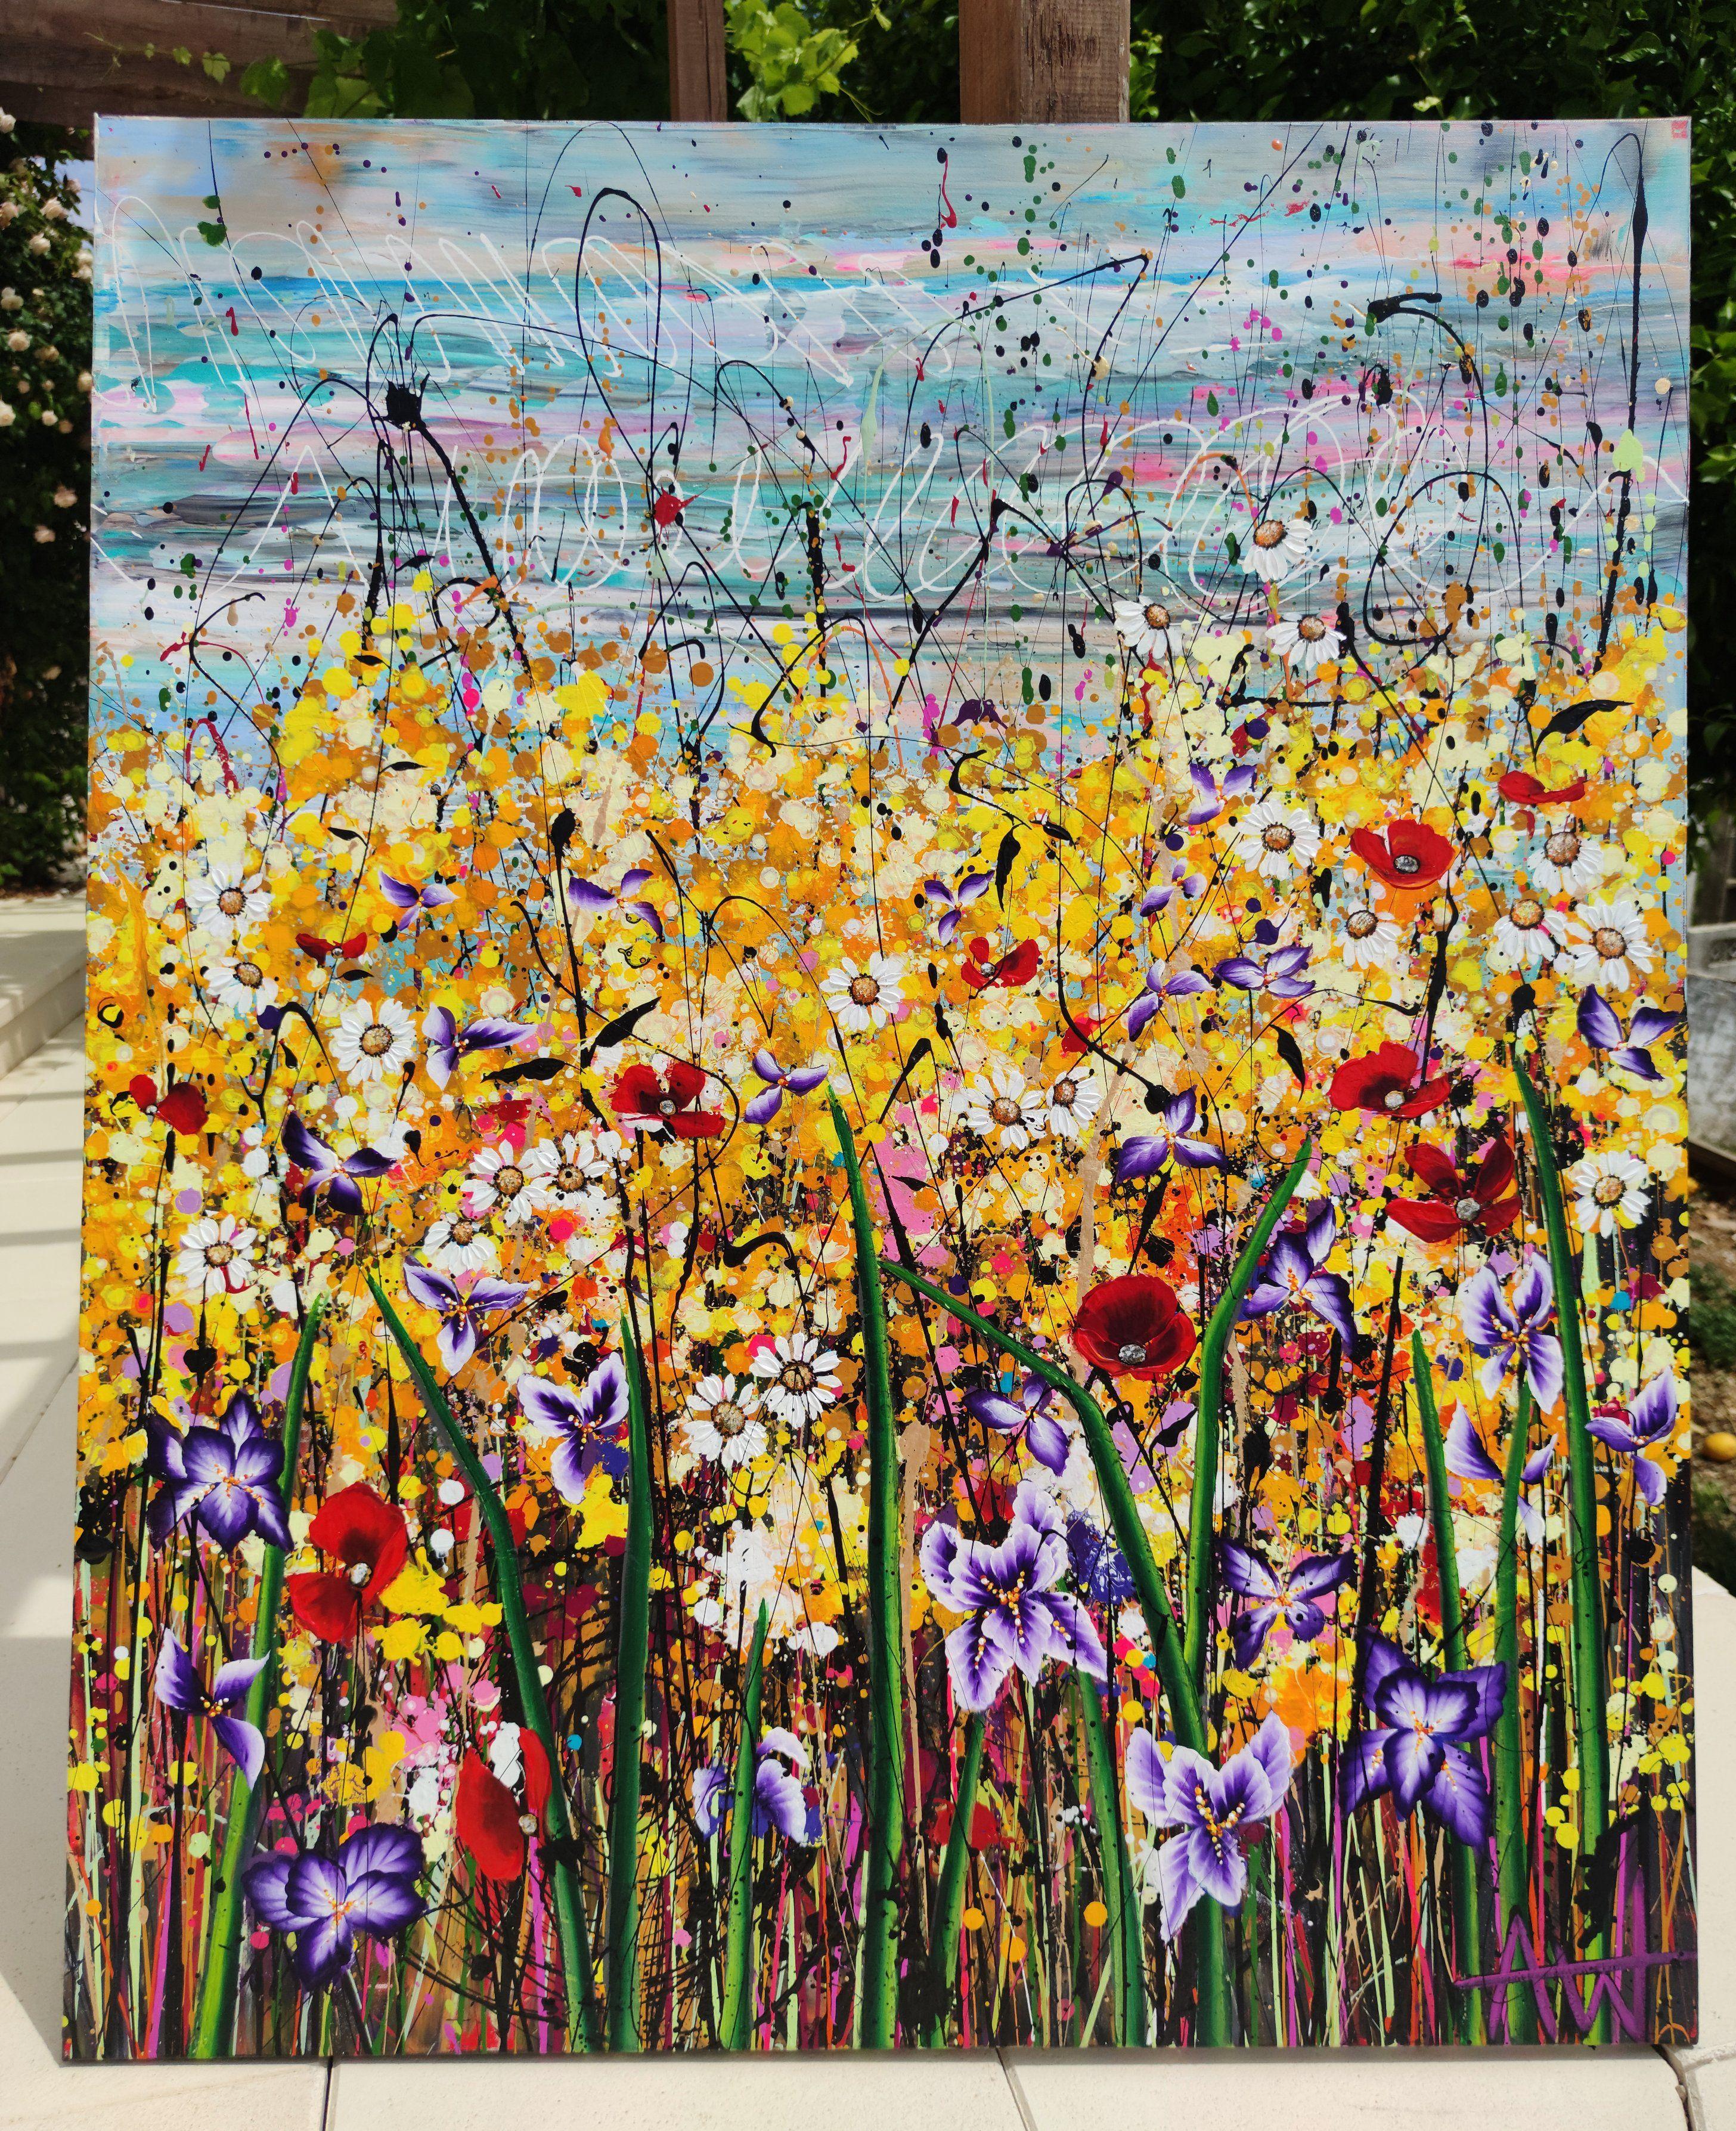 Summer Loving, oil and acrylic on canvas, 100 x 120 x 2 cm   Summer Loving, a field of wildflowers stretching up towards the sunshine. Bees buzz, a gentle breeze blows, colour abounds. I lay in this cloud of colour, the warmth of the sun on my face.